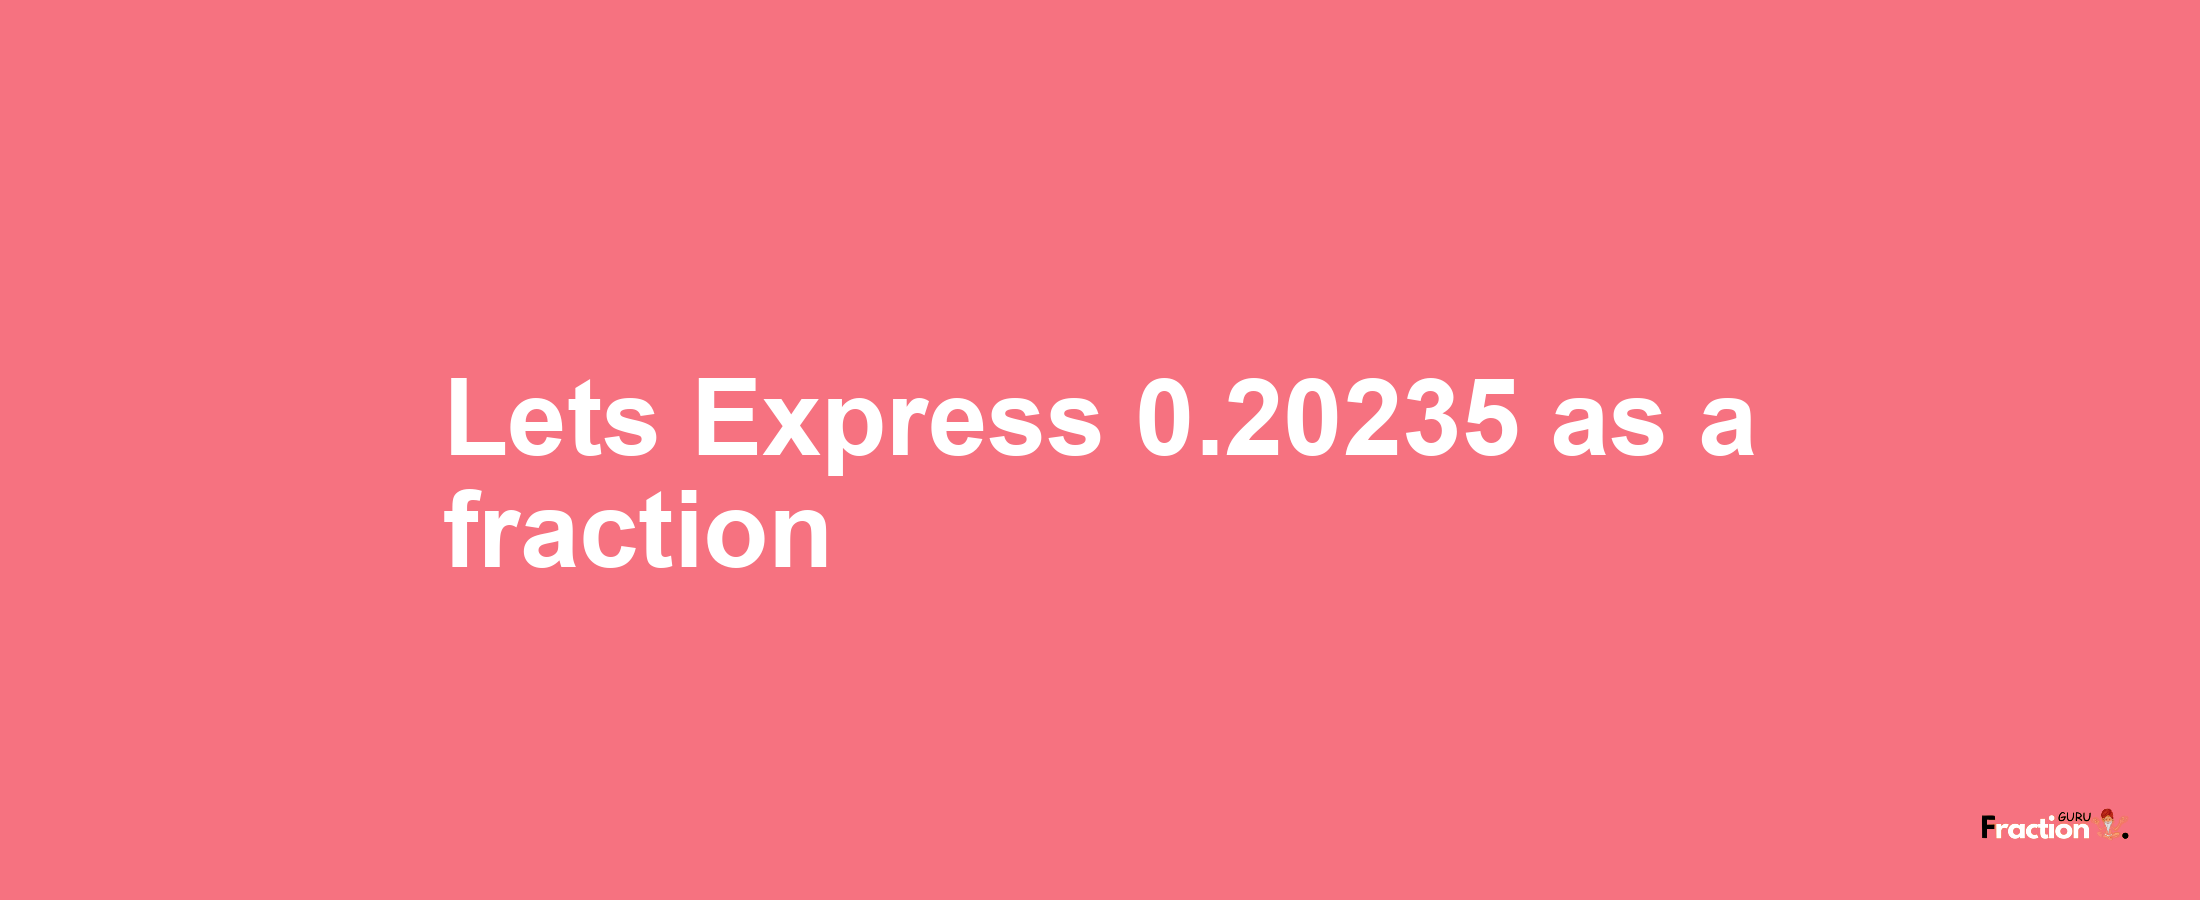 Lets Express 0.20235 as afraction